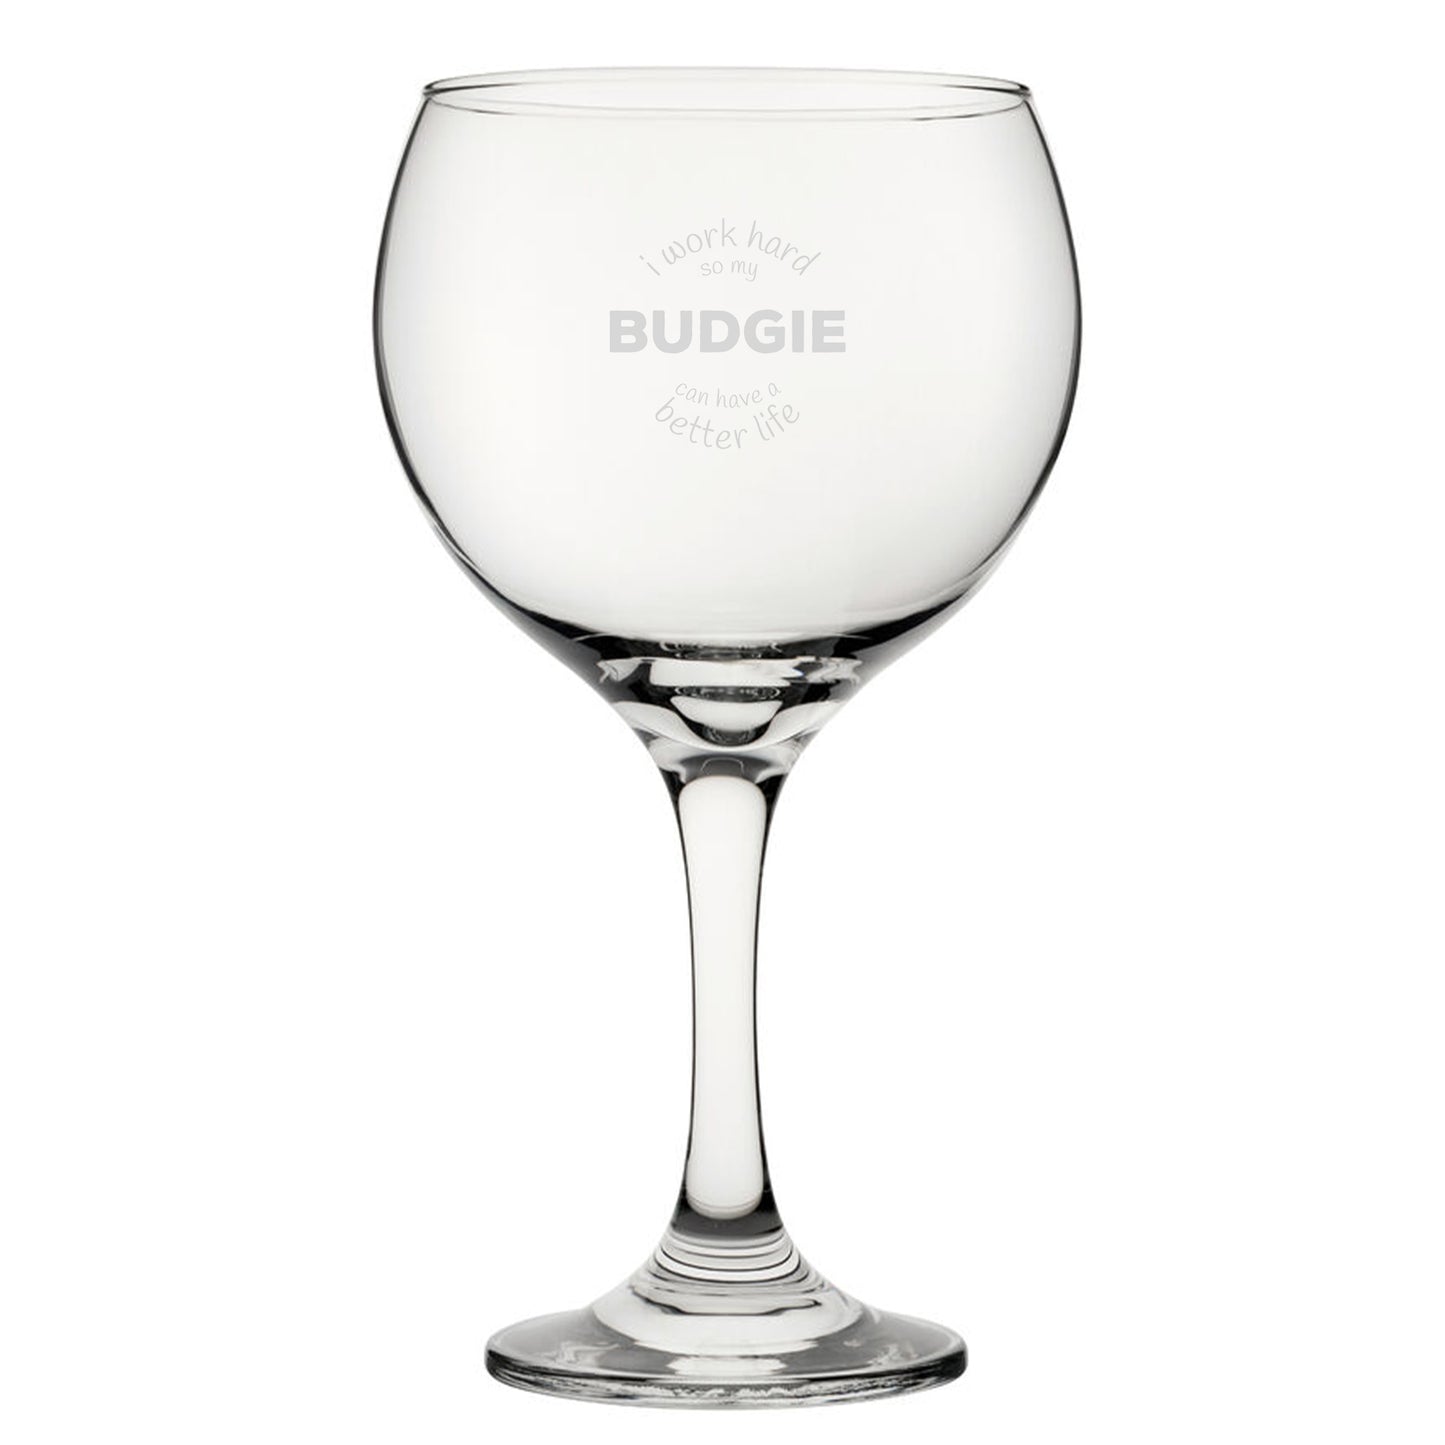 I Work Hard So My Budgie Can Have A Better Life - Engraved Novelty Gin Balloon Cocktail Glass Image 2